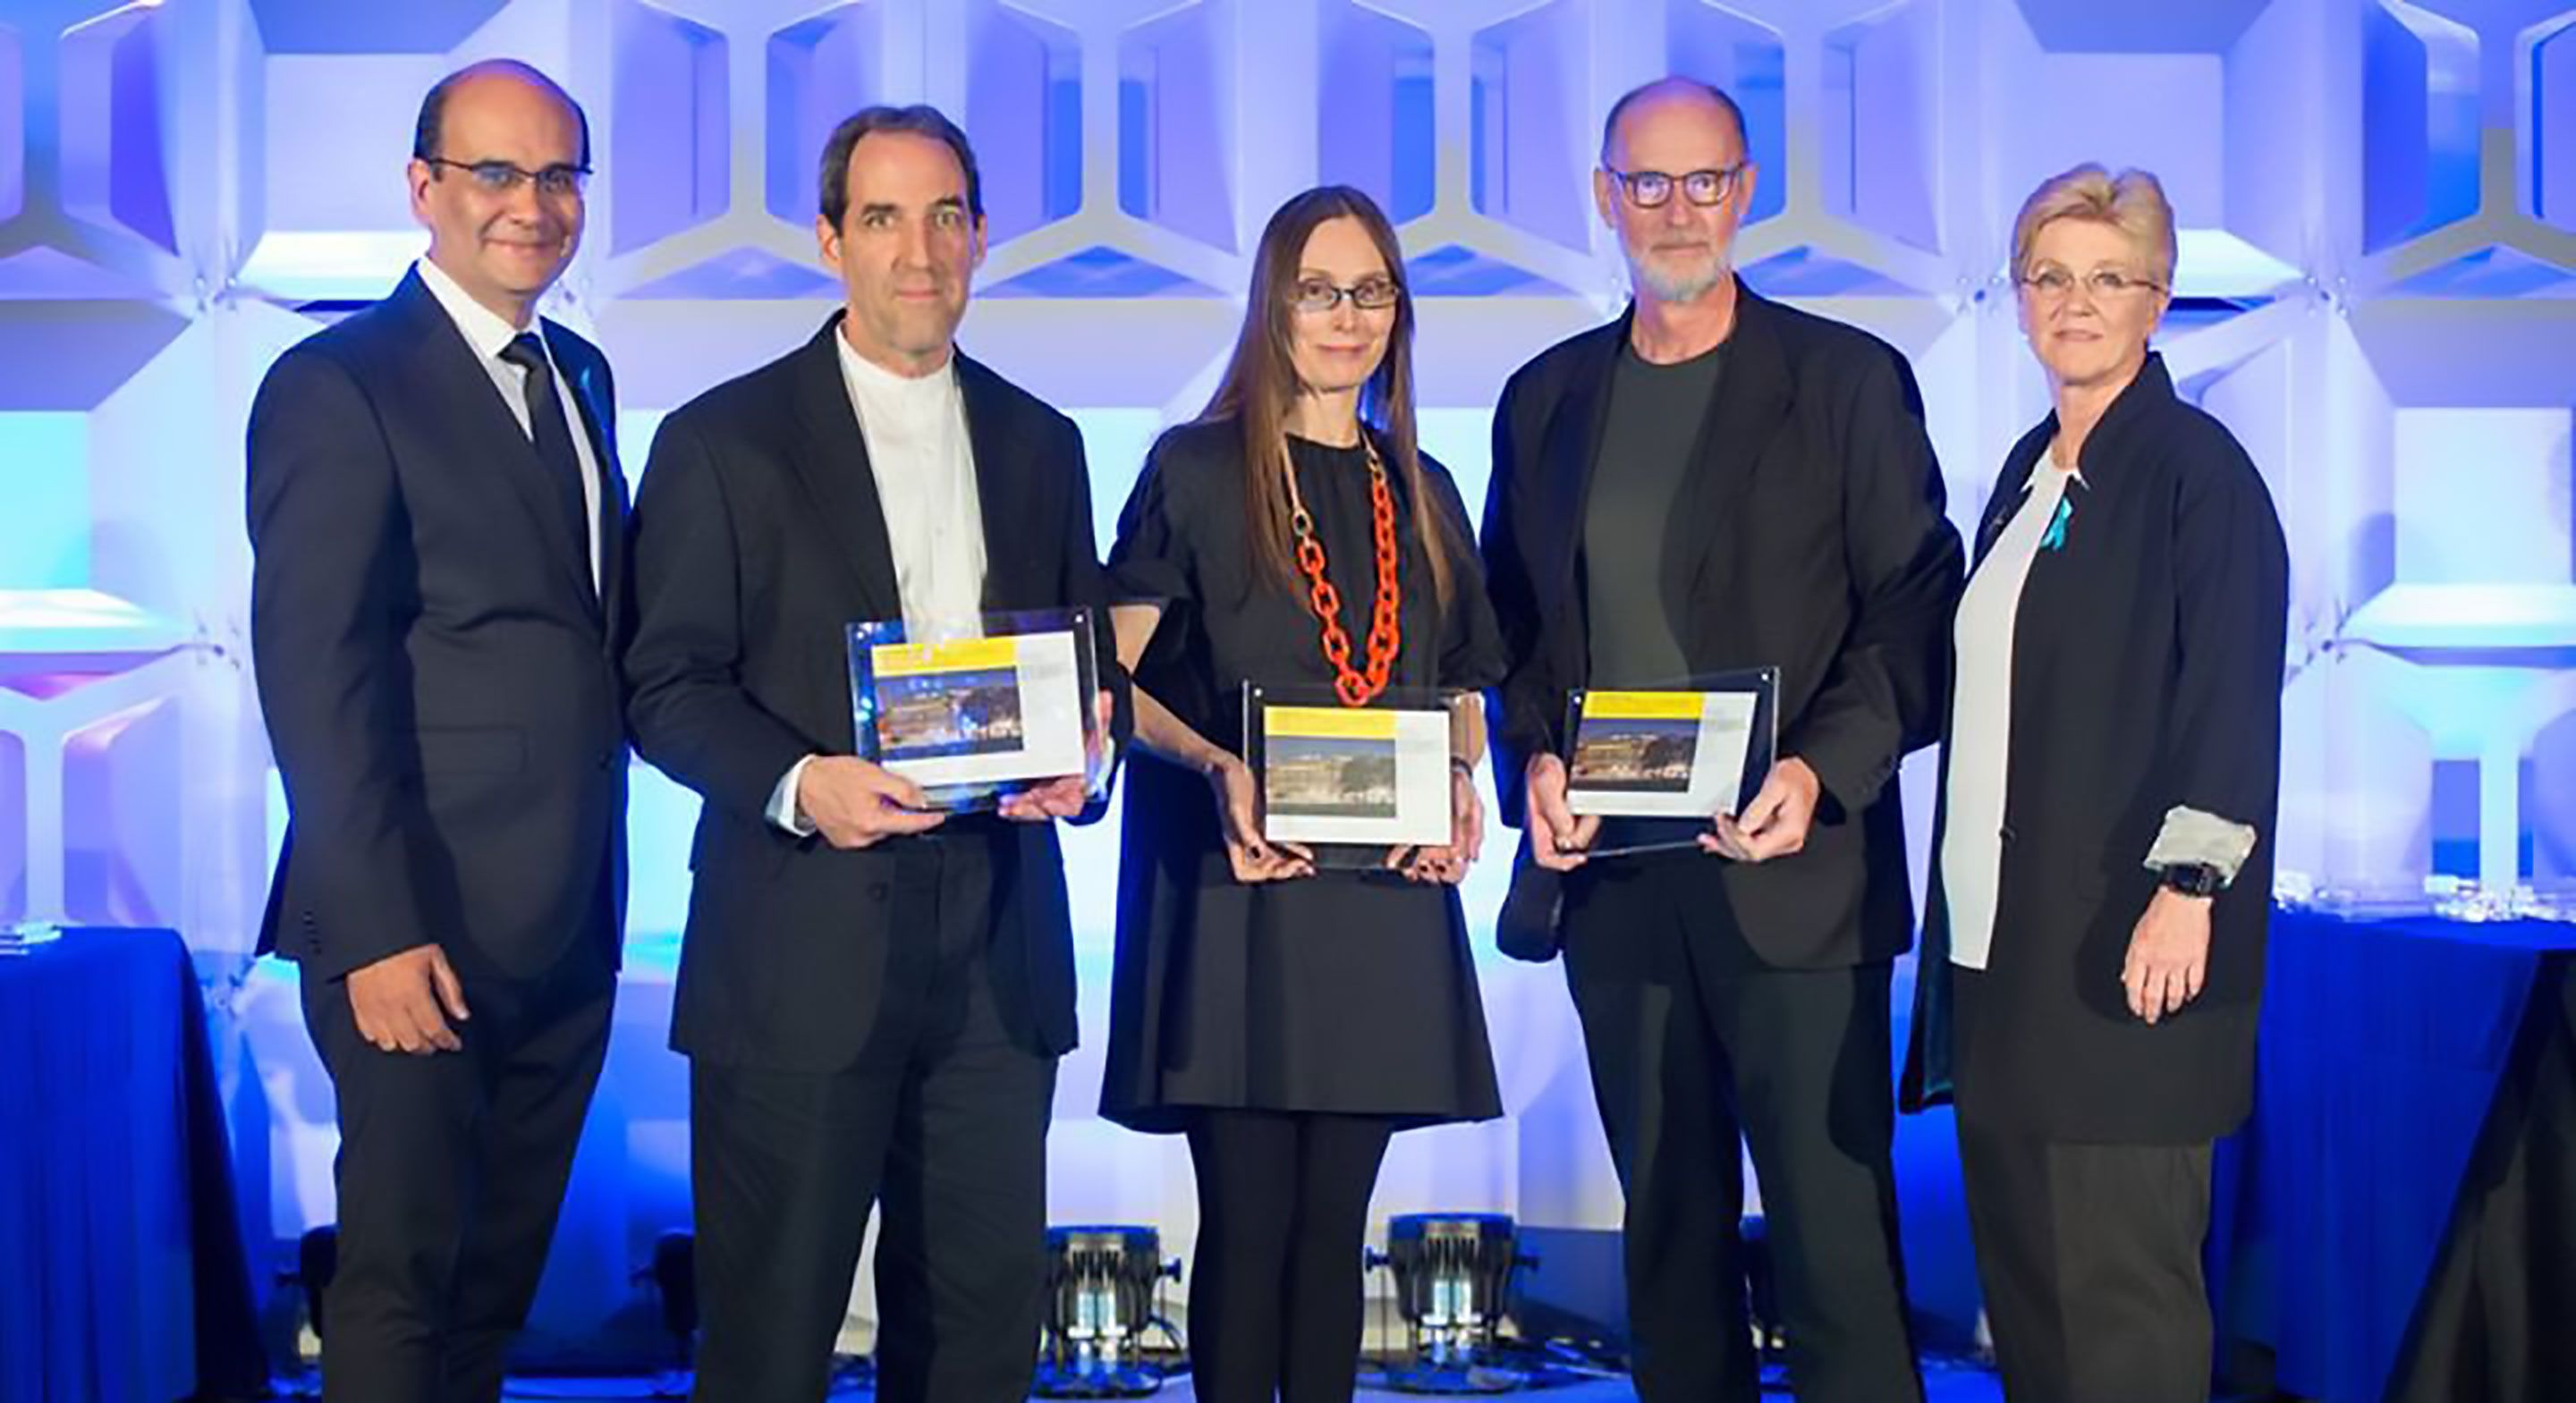 FMS received two awards at the IALD Award Event FISHER MARANTZ STONE